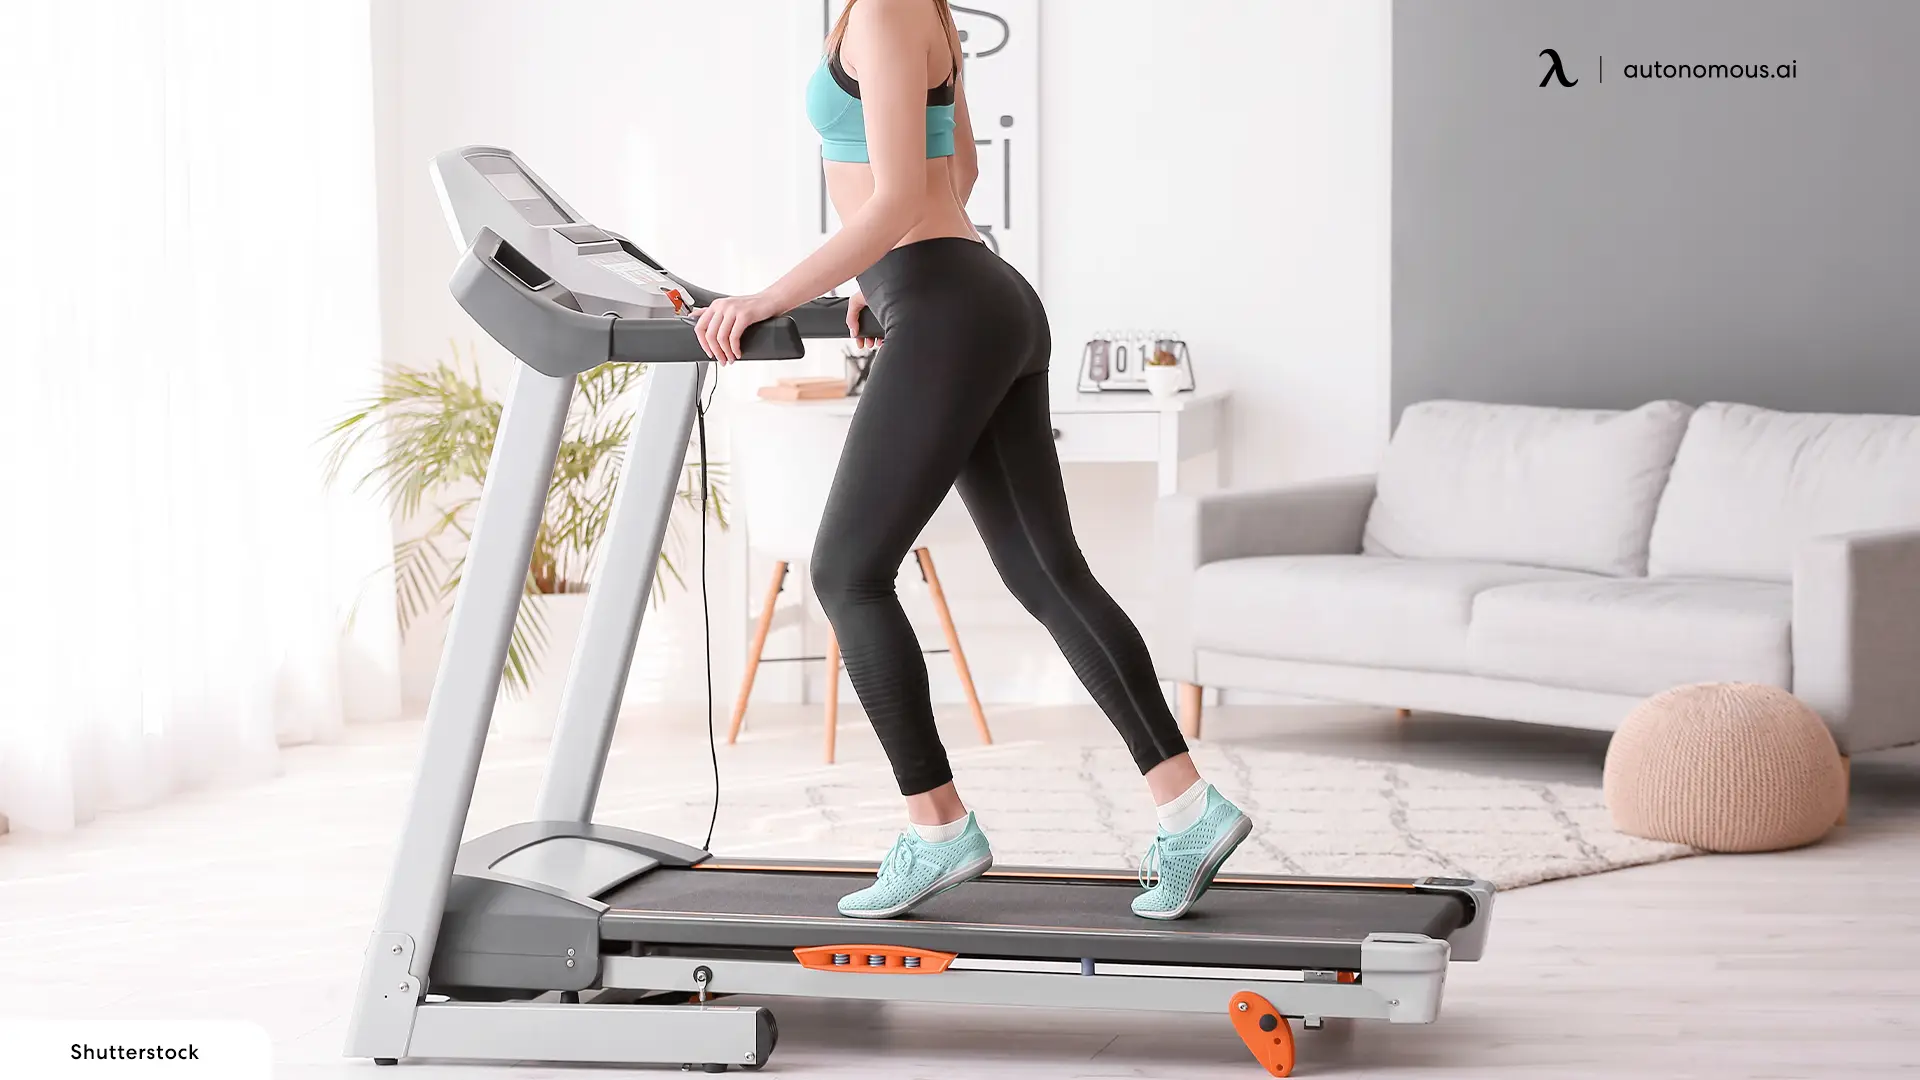 The incline percentage feature will strengthen your muscles